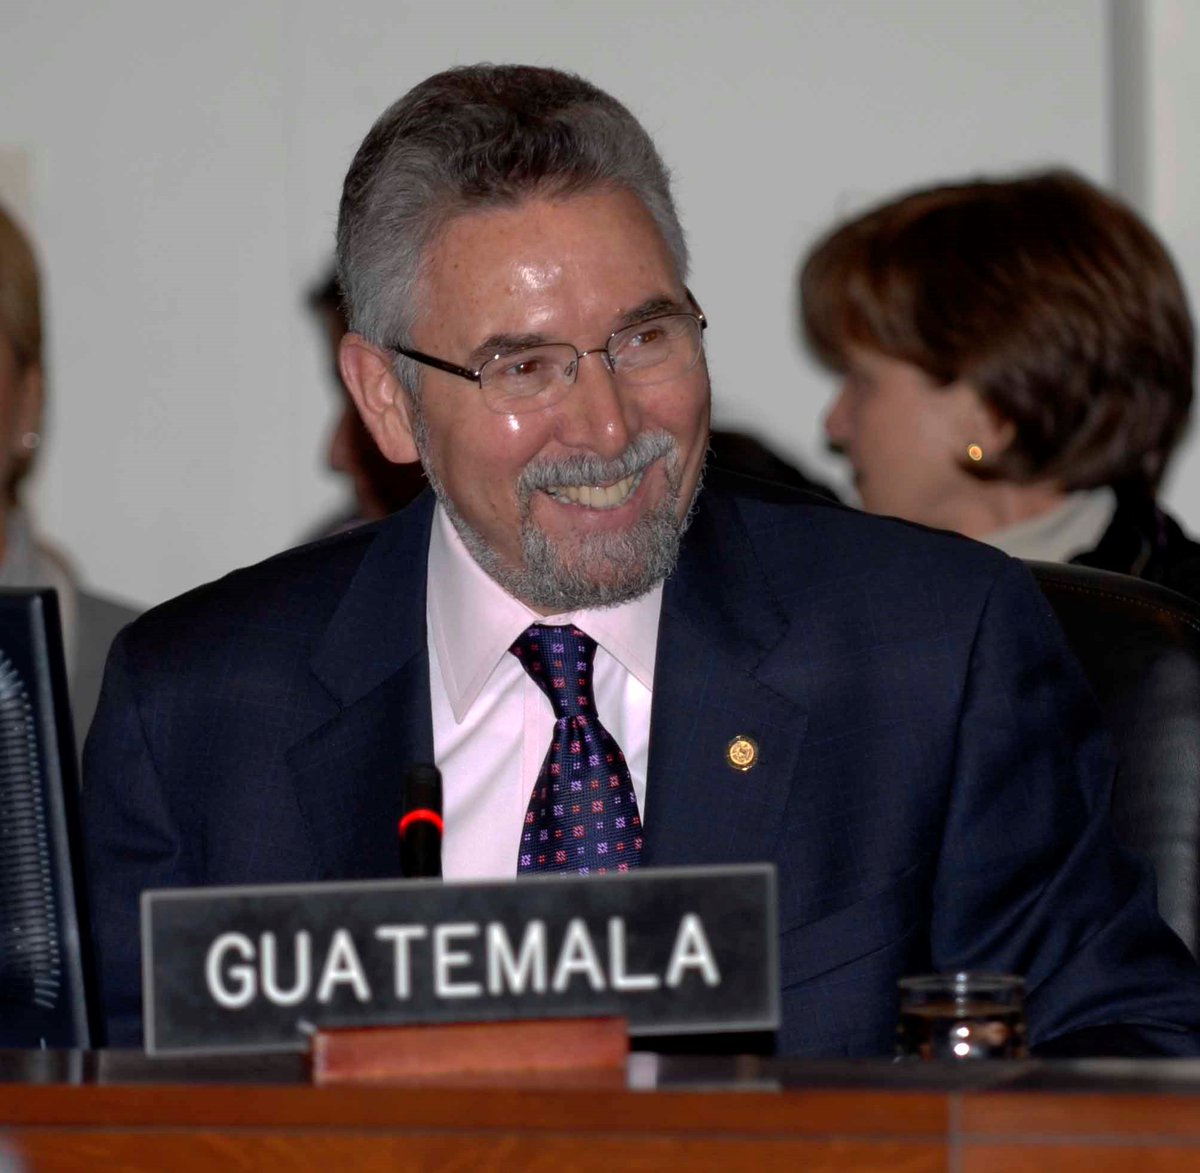 I am deeply saddened by the passing of Amb. Francisco Villagran of Guatemala. Throughout his long & distinguished career, including as Amb to the @OAS_official, he was a great friend to the U.S. and the Inter American System. From the peaceful resolution of conflict to support